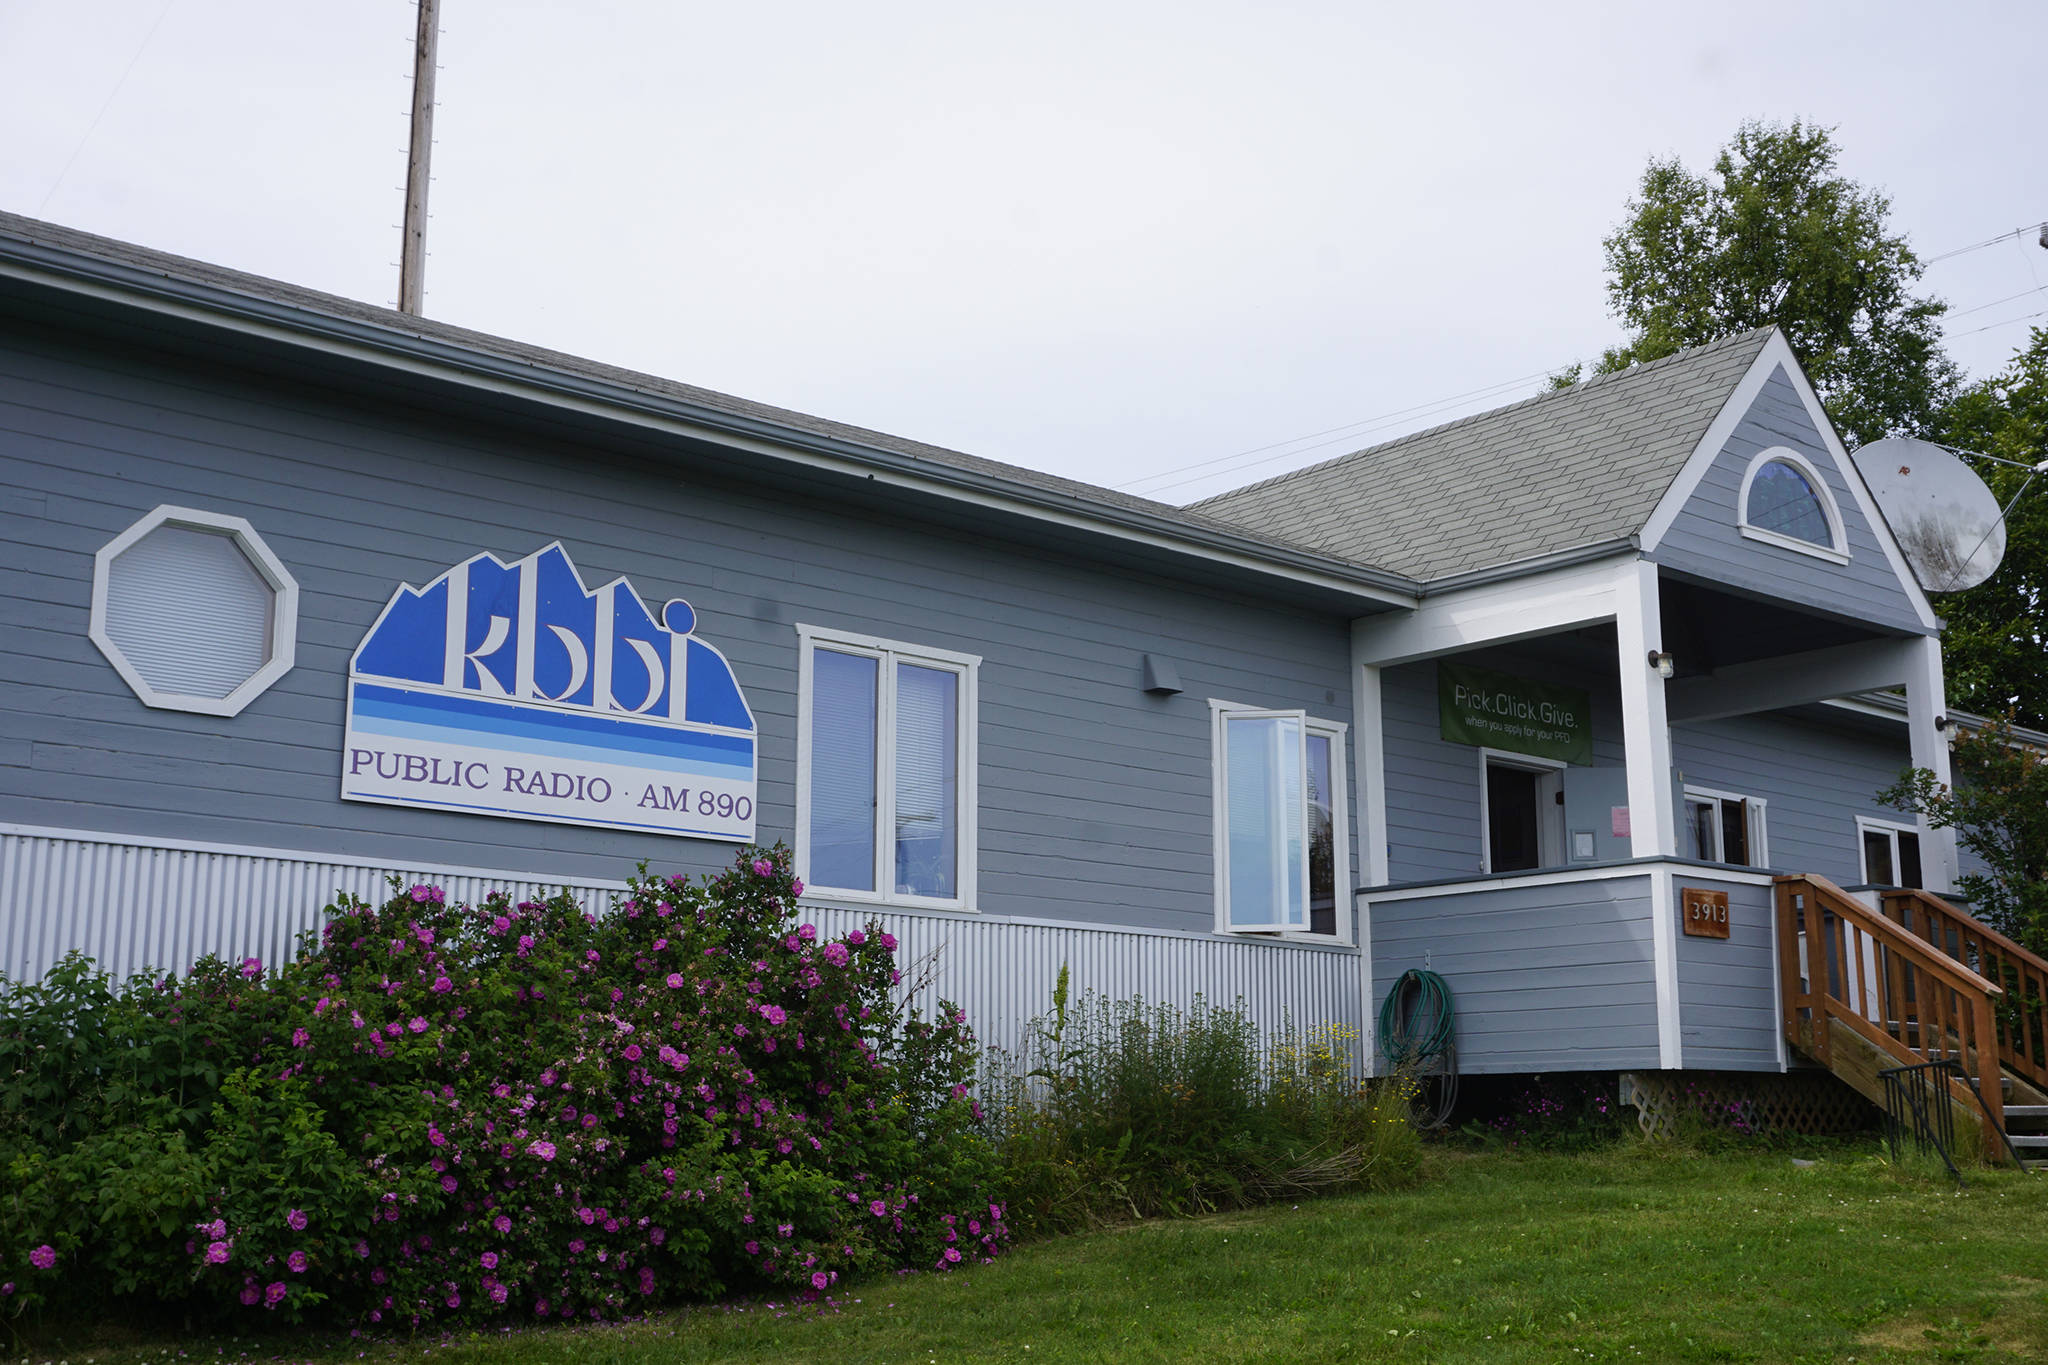 The KBBI Public Radio office and studio is on Kachemak Way, as seen in this photo taken July 2m 2019, in Homer, Alaska. (Photo by Michael Armstrong/Homer News)